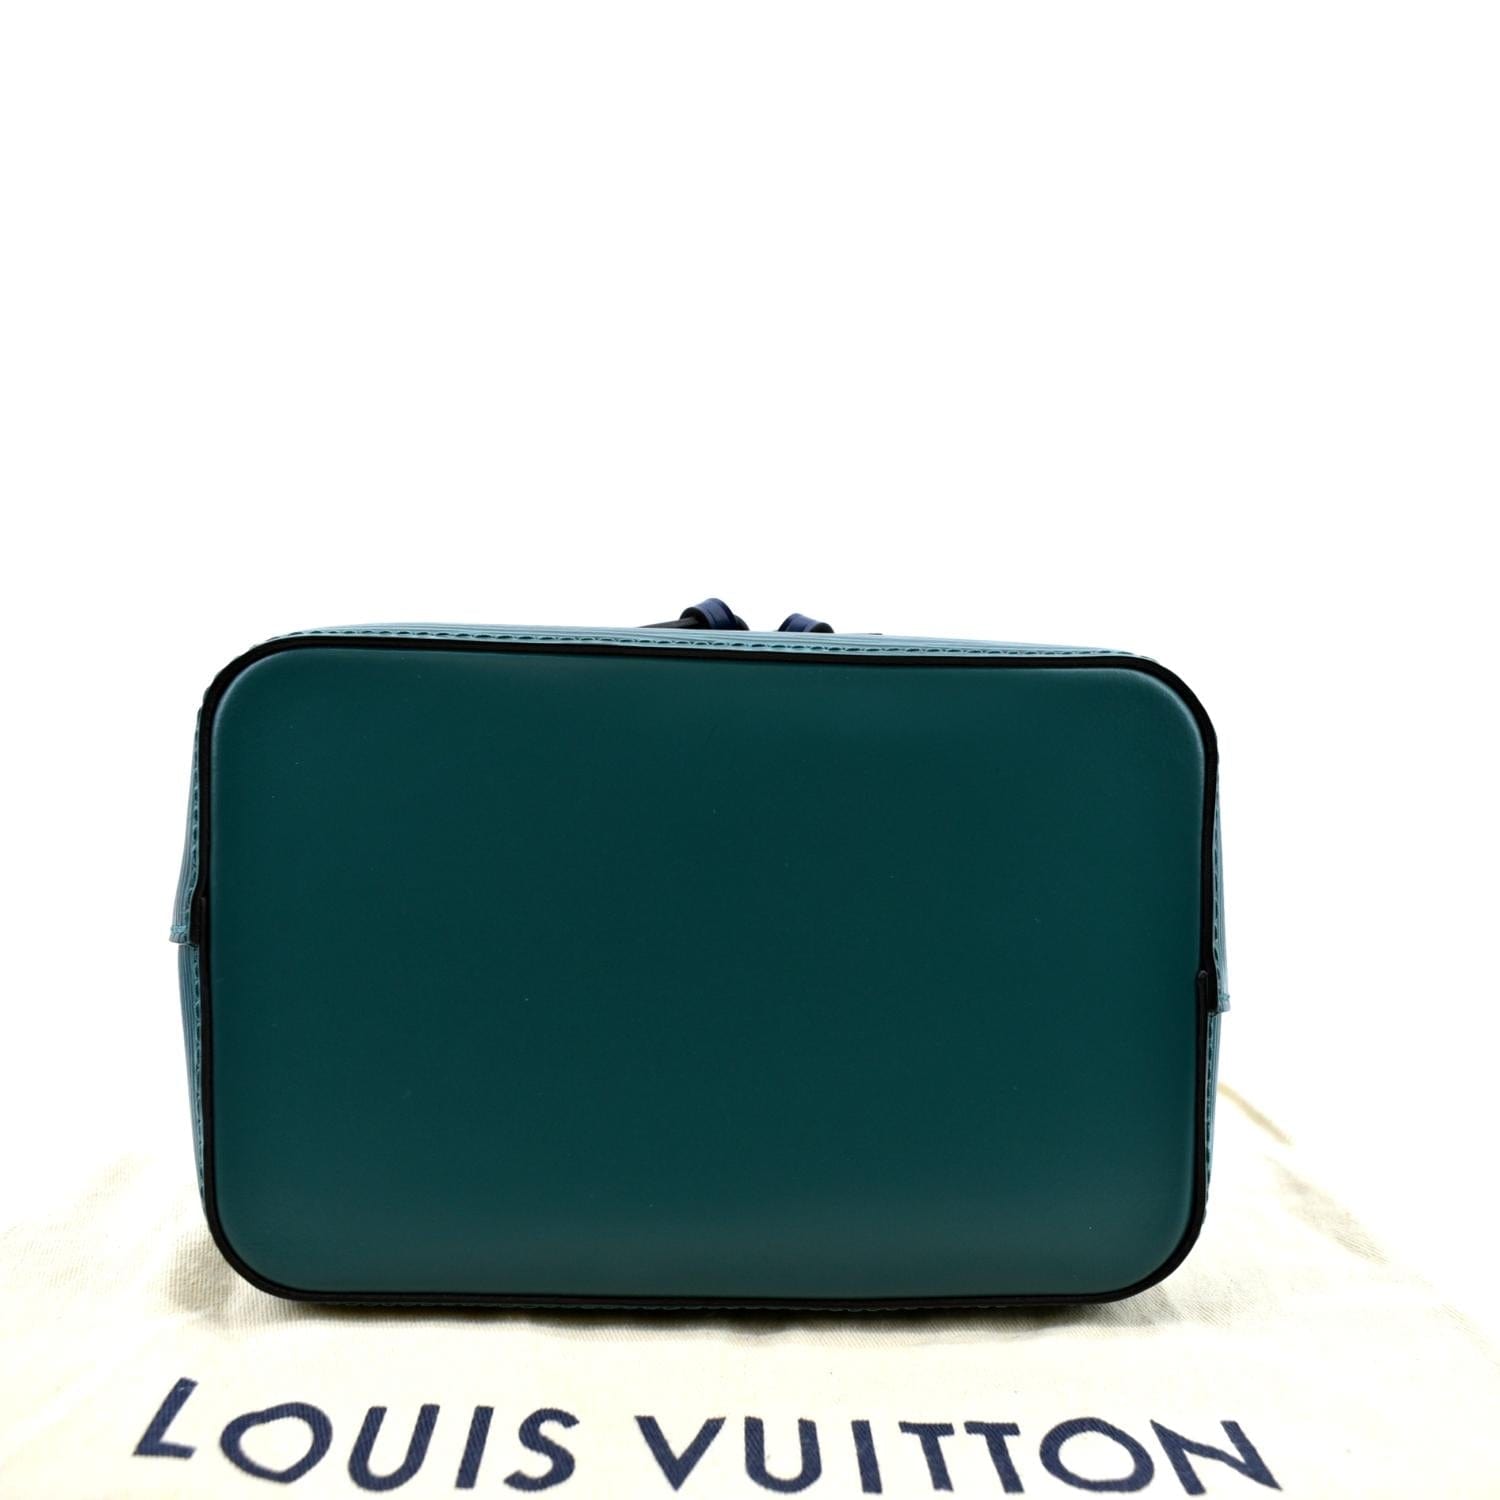 Louis Vuitton, Bags, Louis Vuitton Tote Bag In Emerald Green Gift With  Purchase